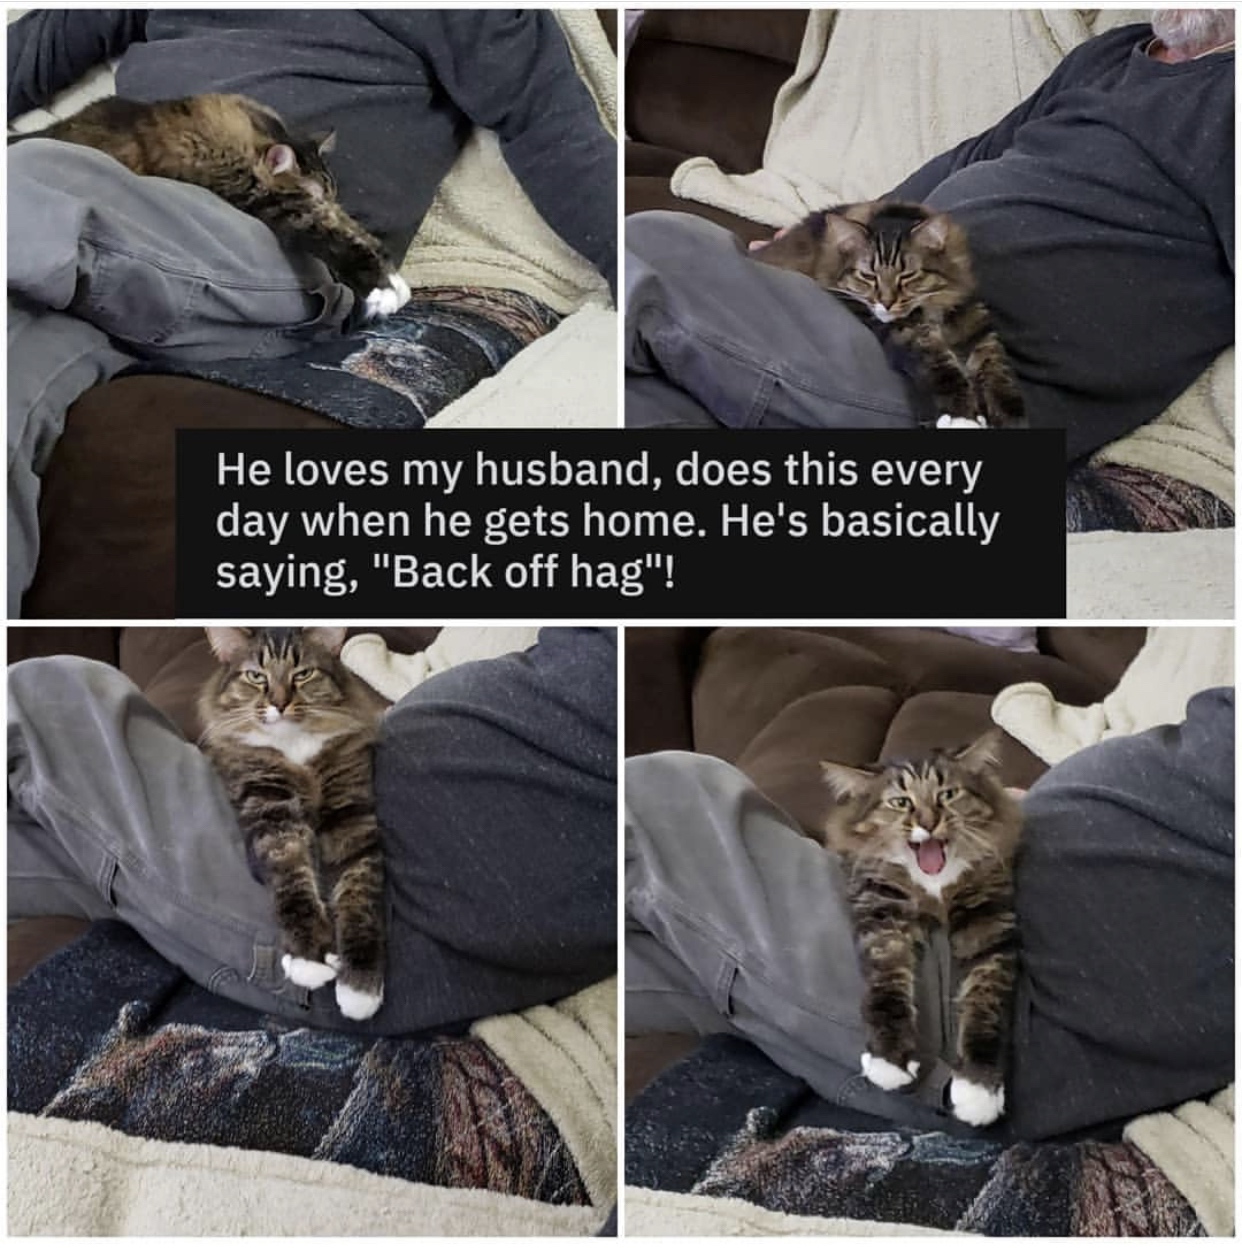 cat - He loves my husband, does this every day when he gets home. He's basically saying, "Back off hag"!